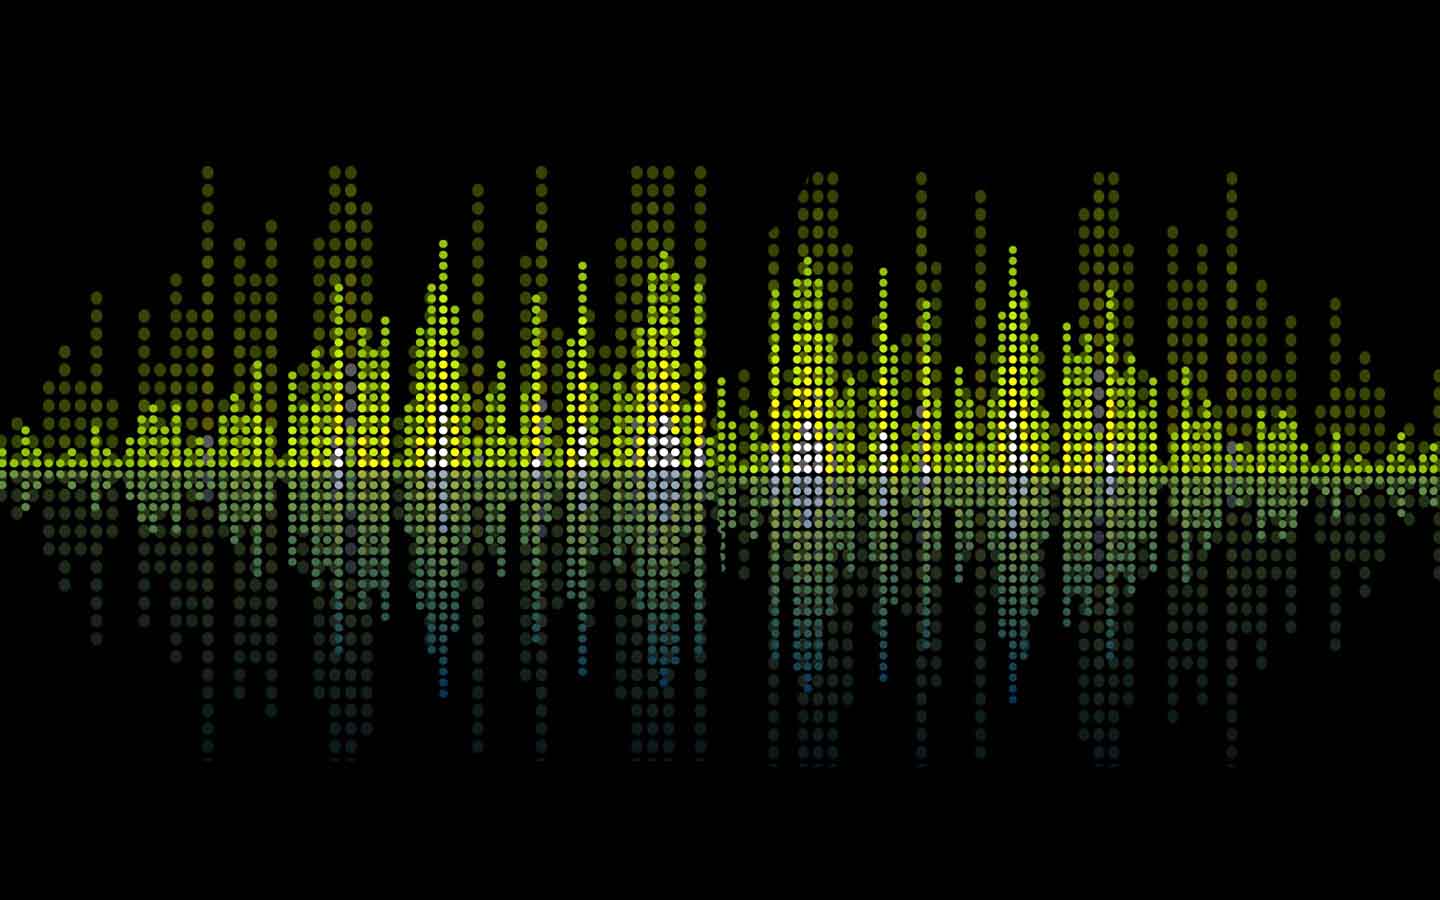 Music Sound Waves Live Wallpaper On